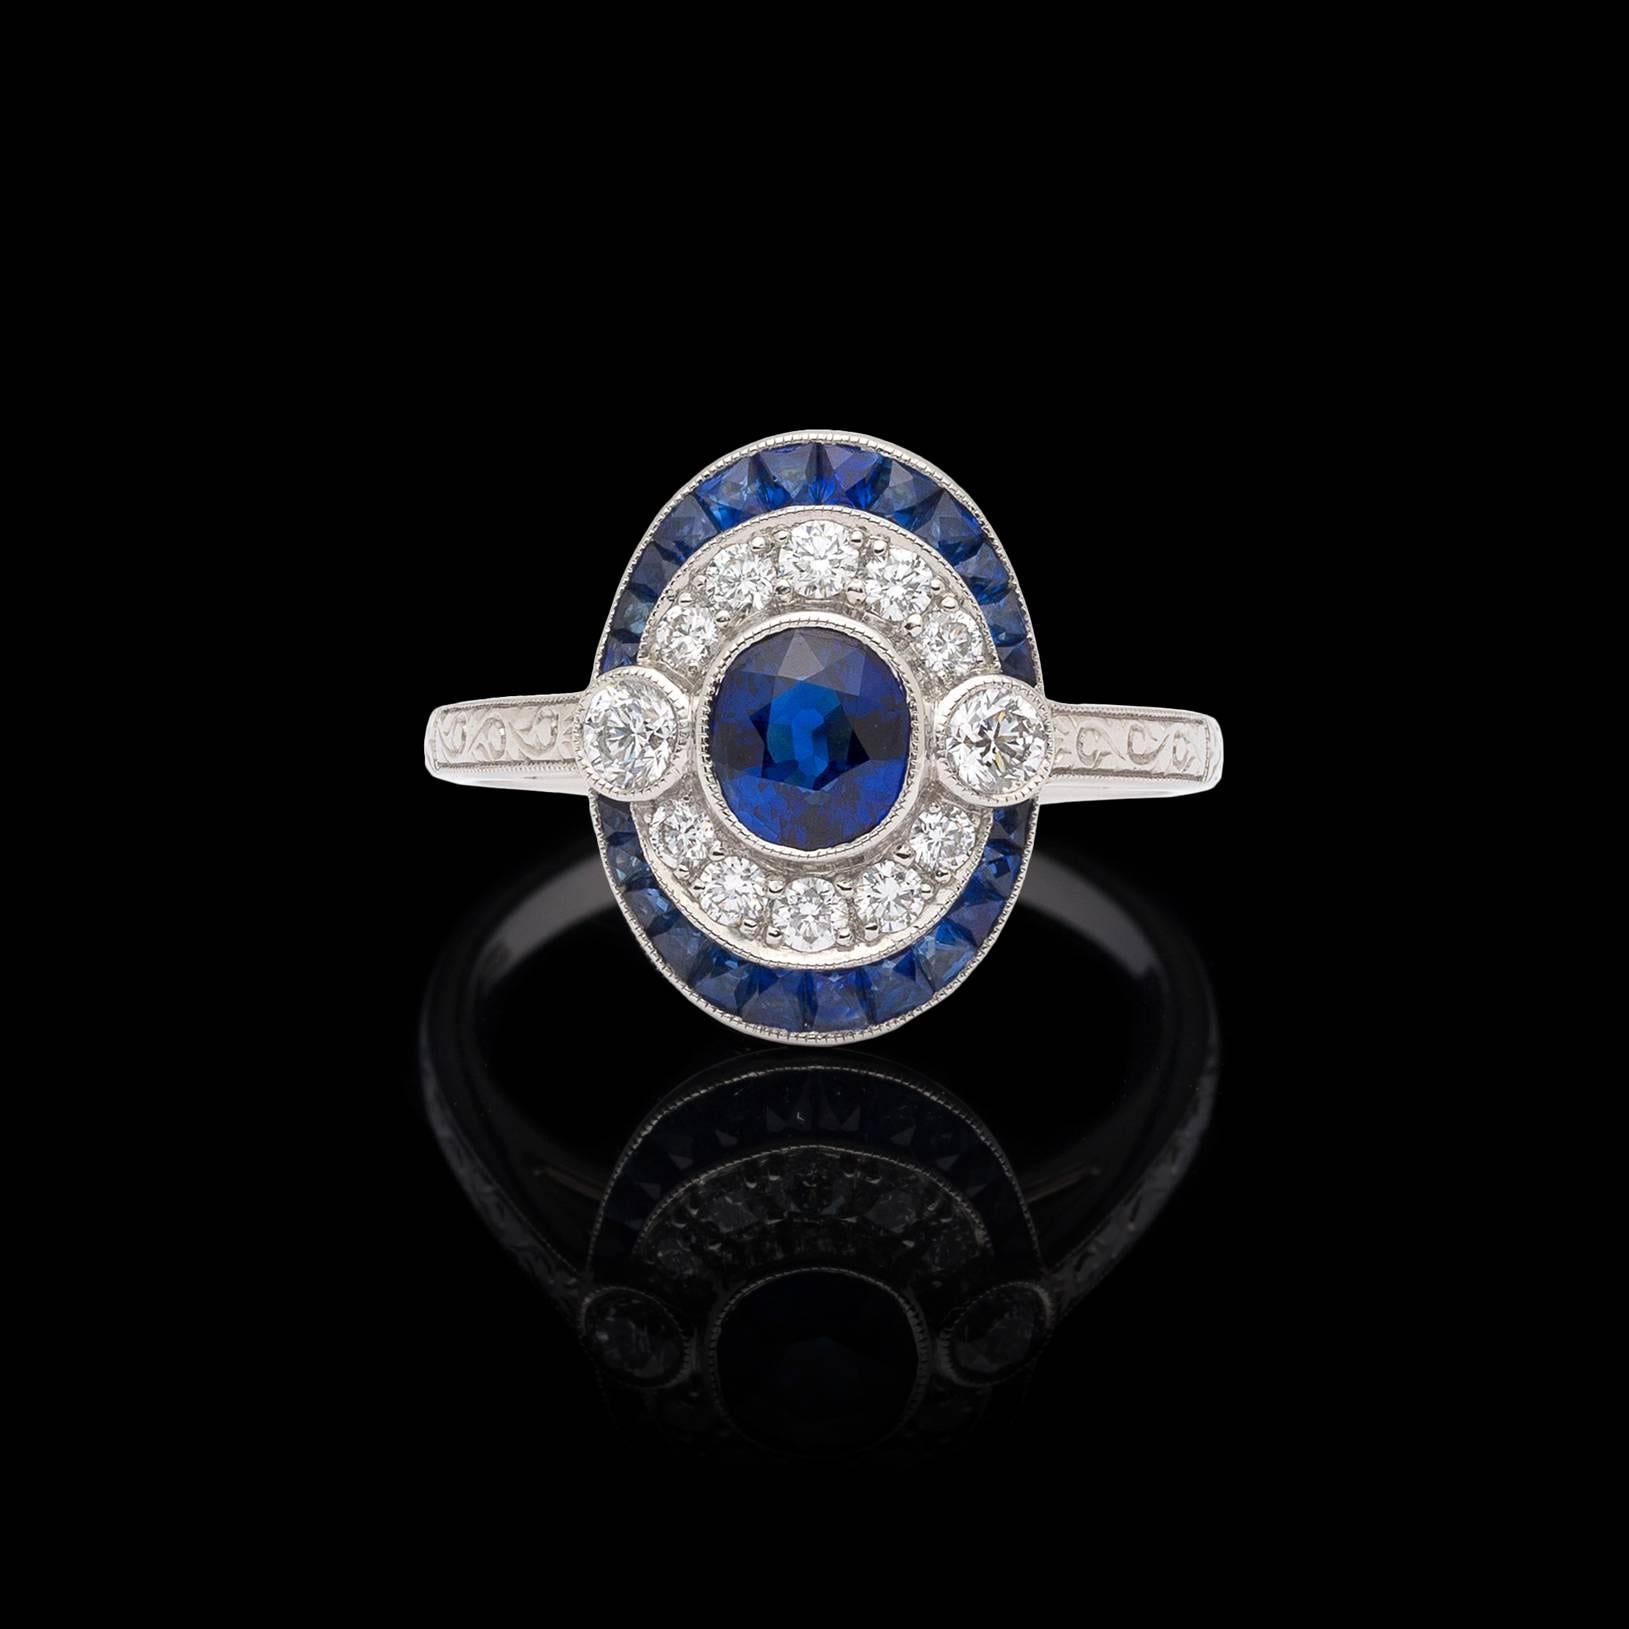 Bringing back the elegance of the art deco era, this platinum ring features an oval-cut sapphire, surrounded by round brilliant-cut diamonds, with yet another frame of calibre-cut sapphires. Sapphires weigh in total 1.42 carats, with the diamonds